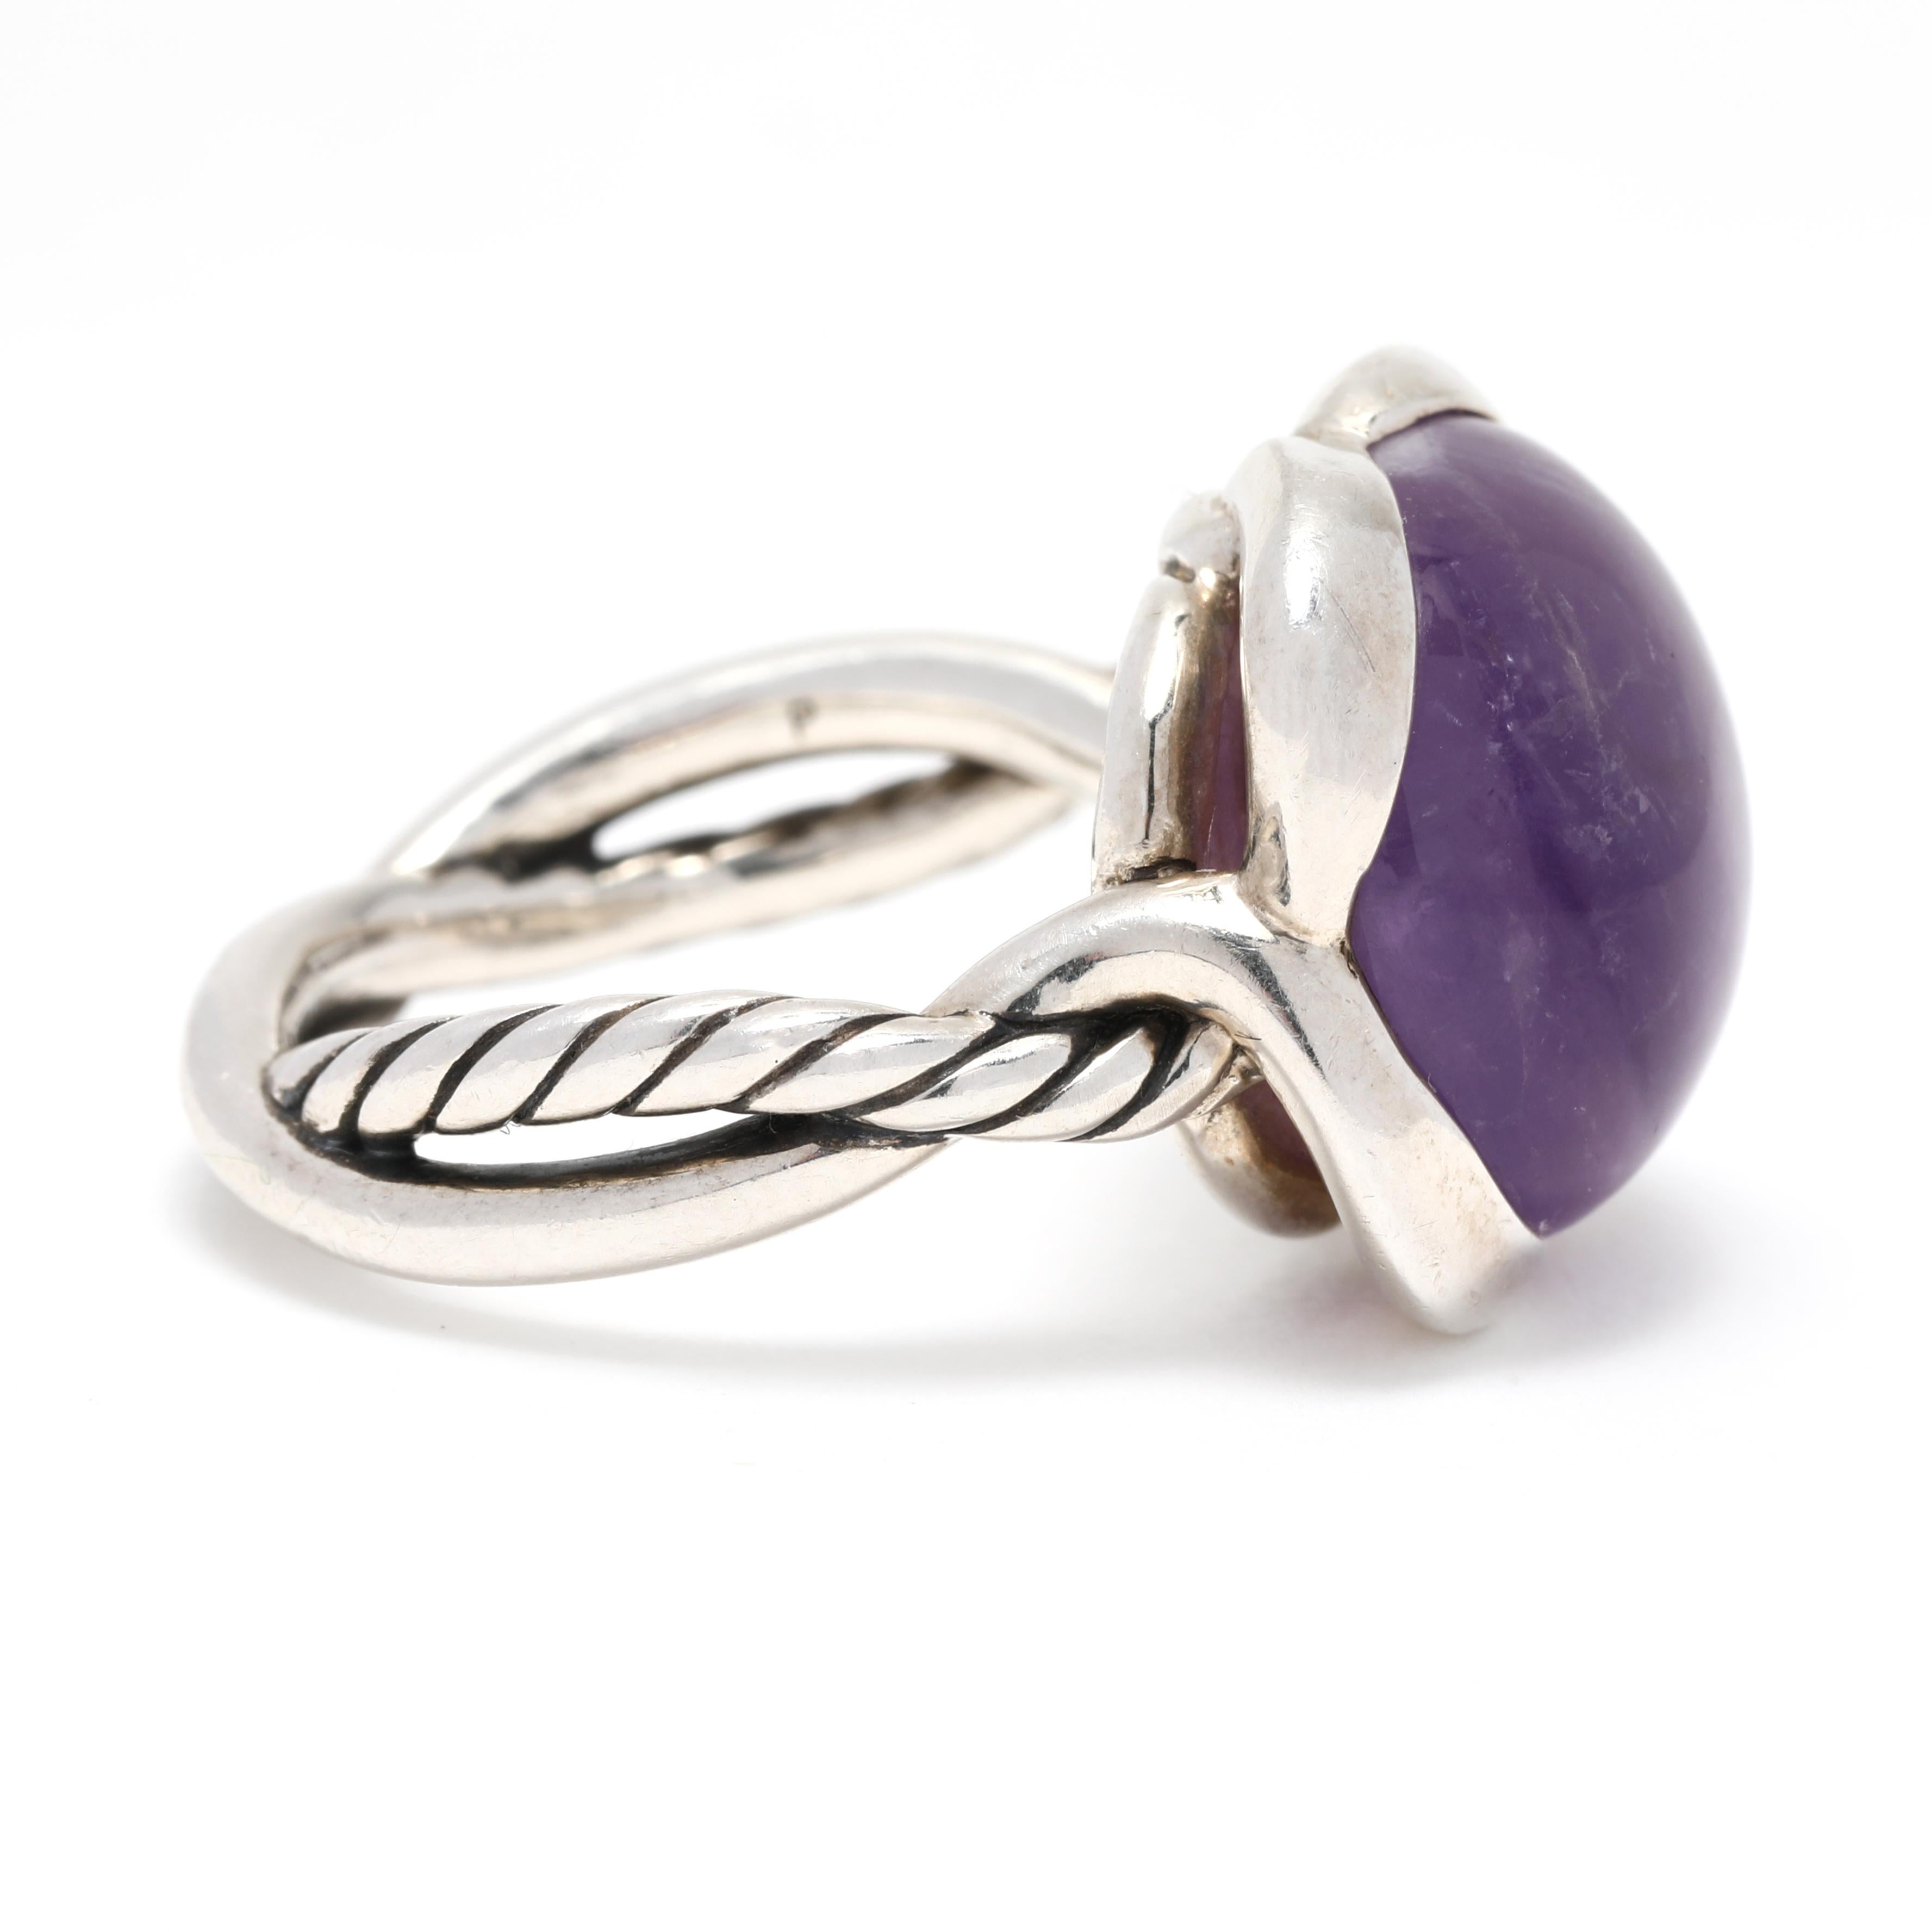 This stunning 9.5ct amethyst infinity ring by David Yurman is a modern classic. Crafted in sterling silver, the large amethyst gemstone is the focus of the ring, framed by a signature infinity shape. This bold cocktail ring is perfect for making a